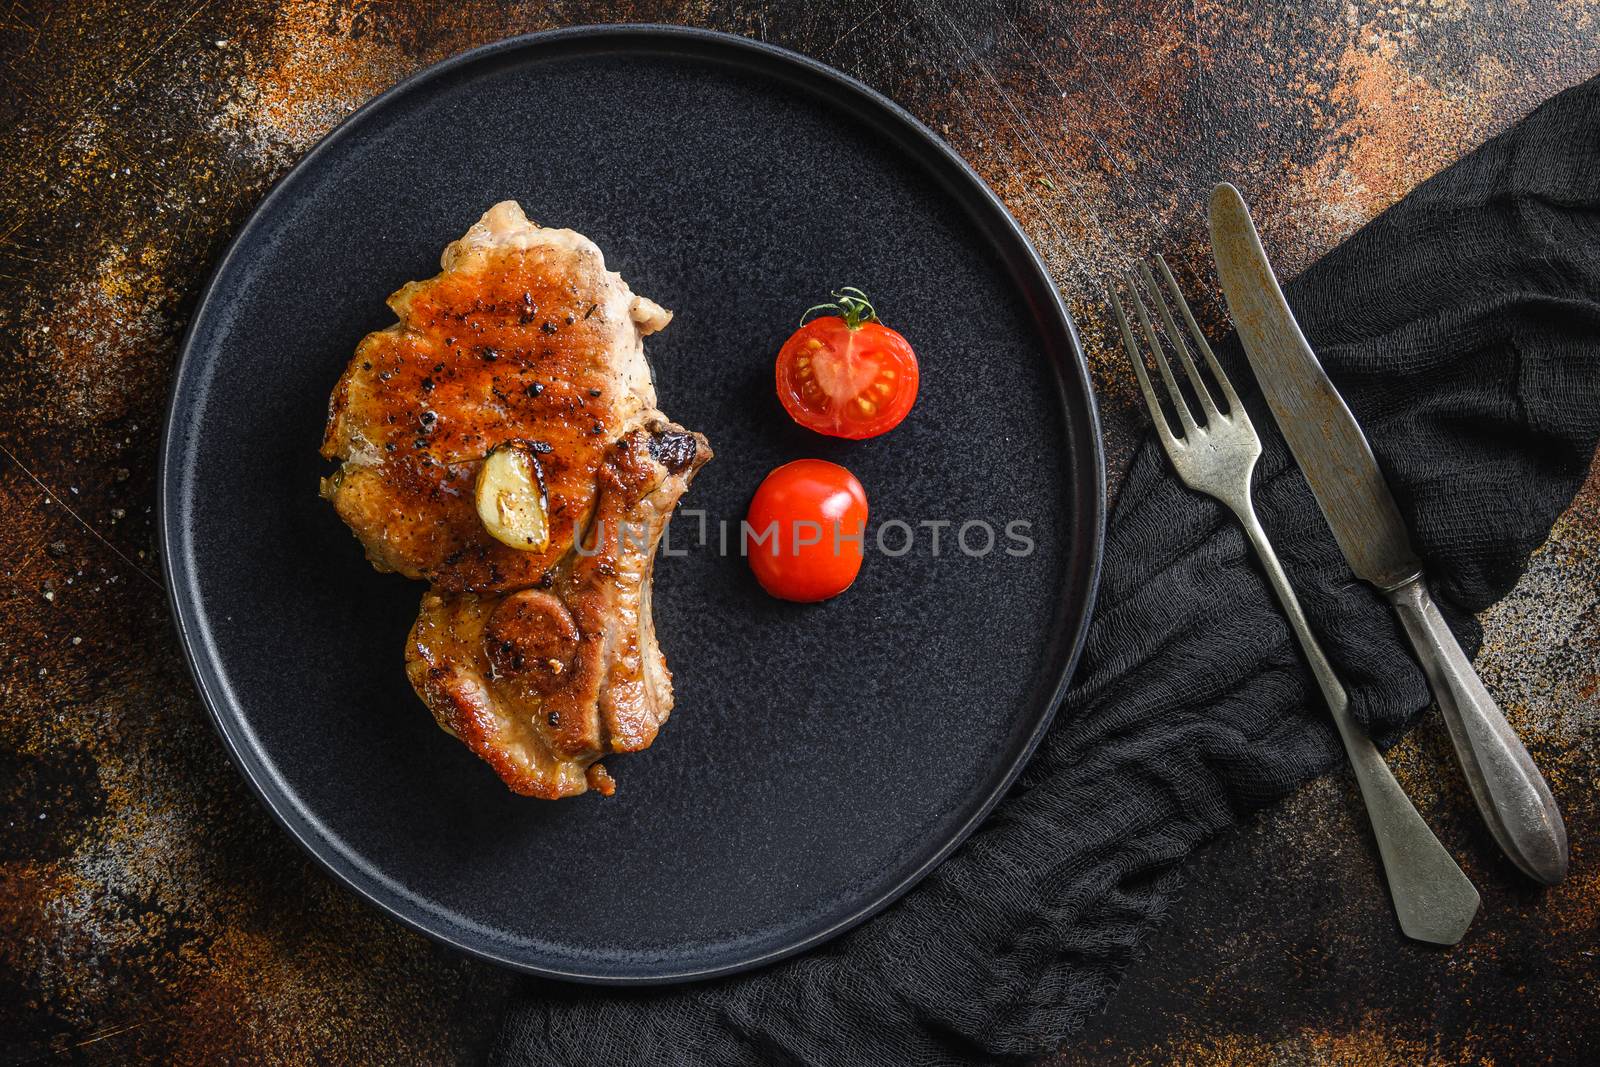 Grilled pork steak on the bone with seasonings on black dish with sfork and knife on cloth, over rustic metall surface overhead top view. by Ilianesolenyi